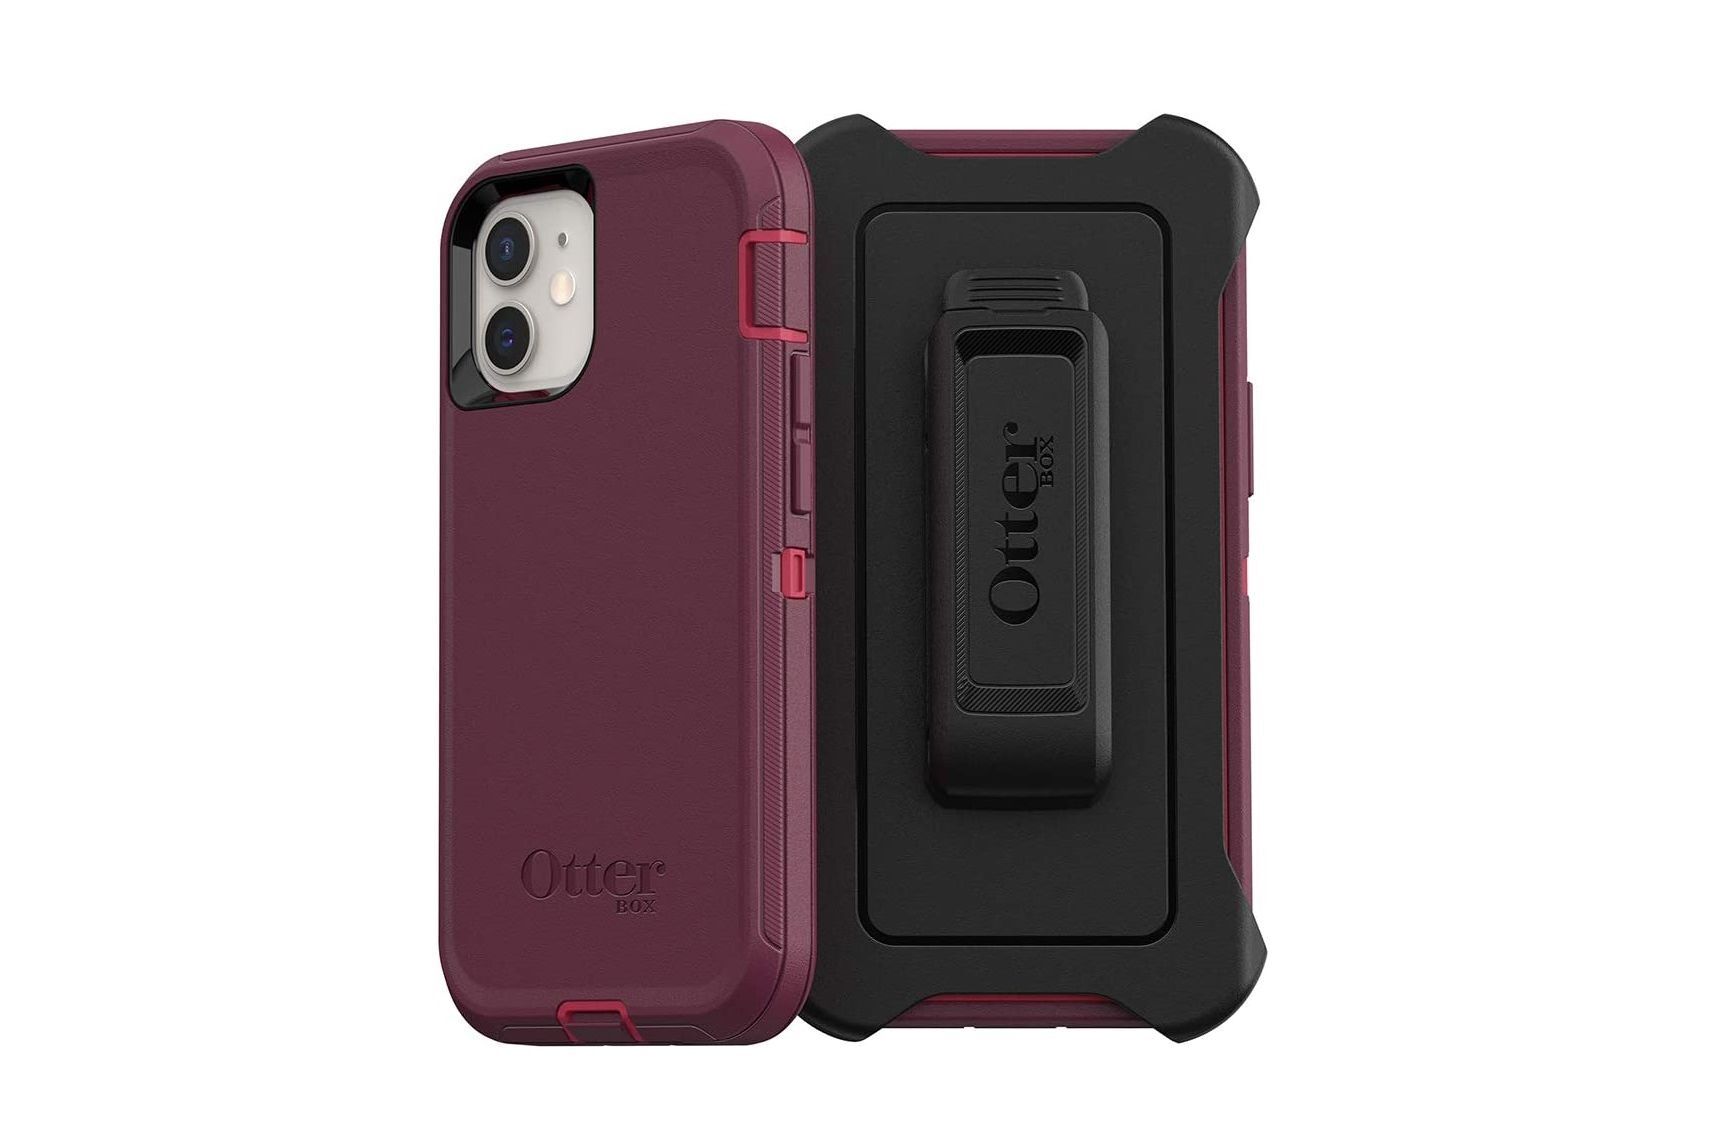 OtterBox Defender Series iPhone 12 mini case - The best iPhone 12 mini cases you can get - updated July 2022